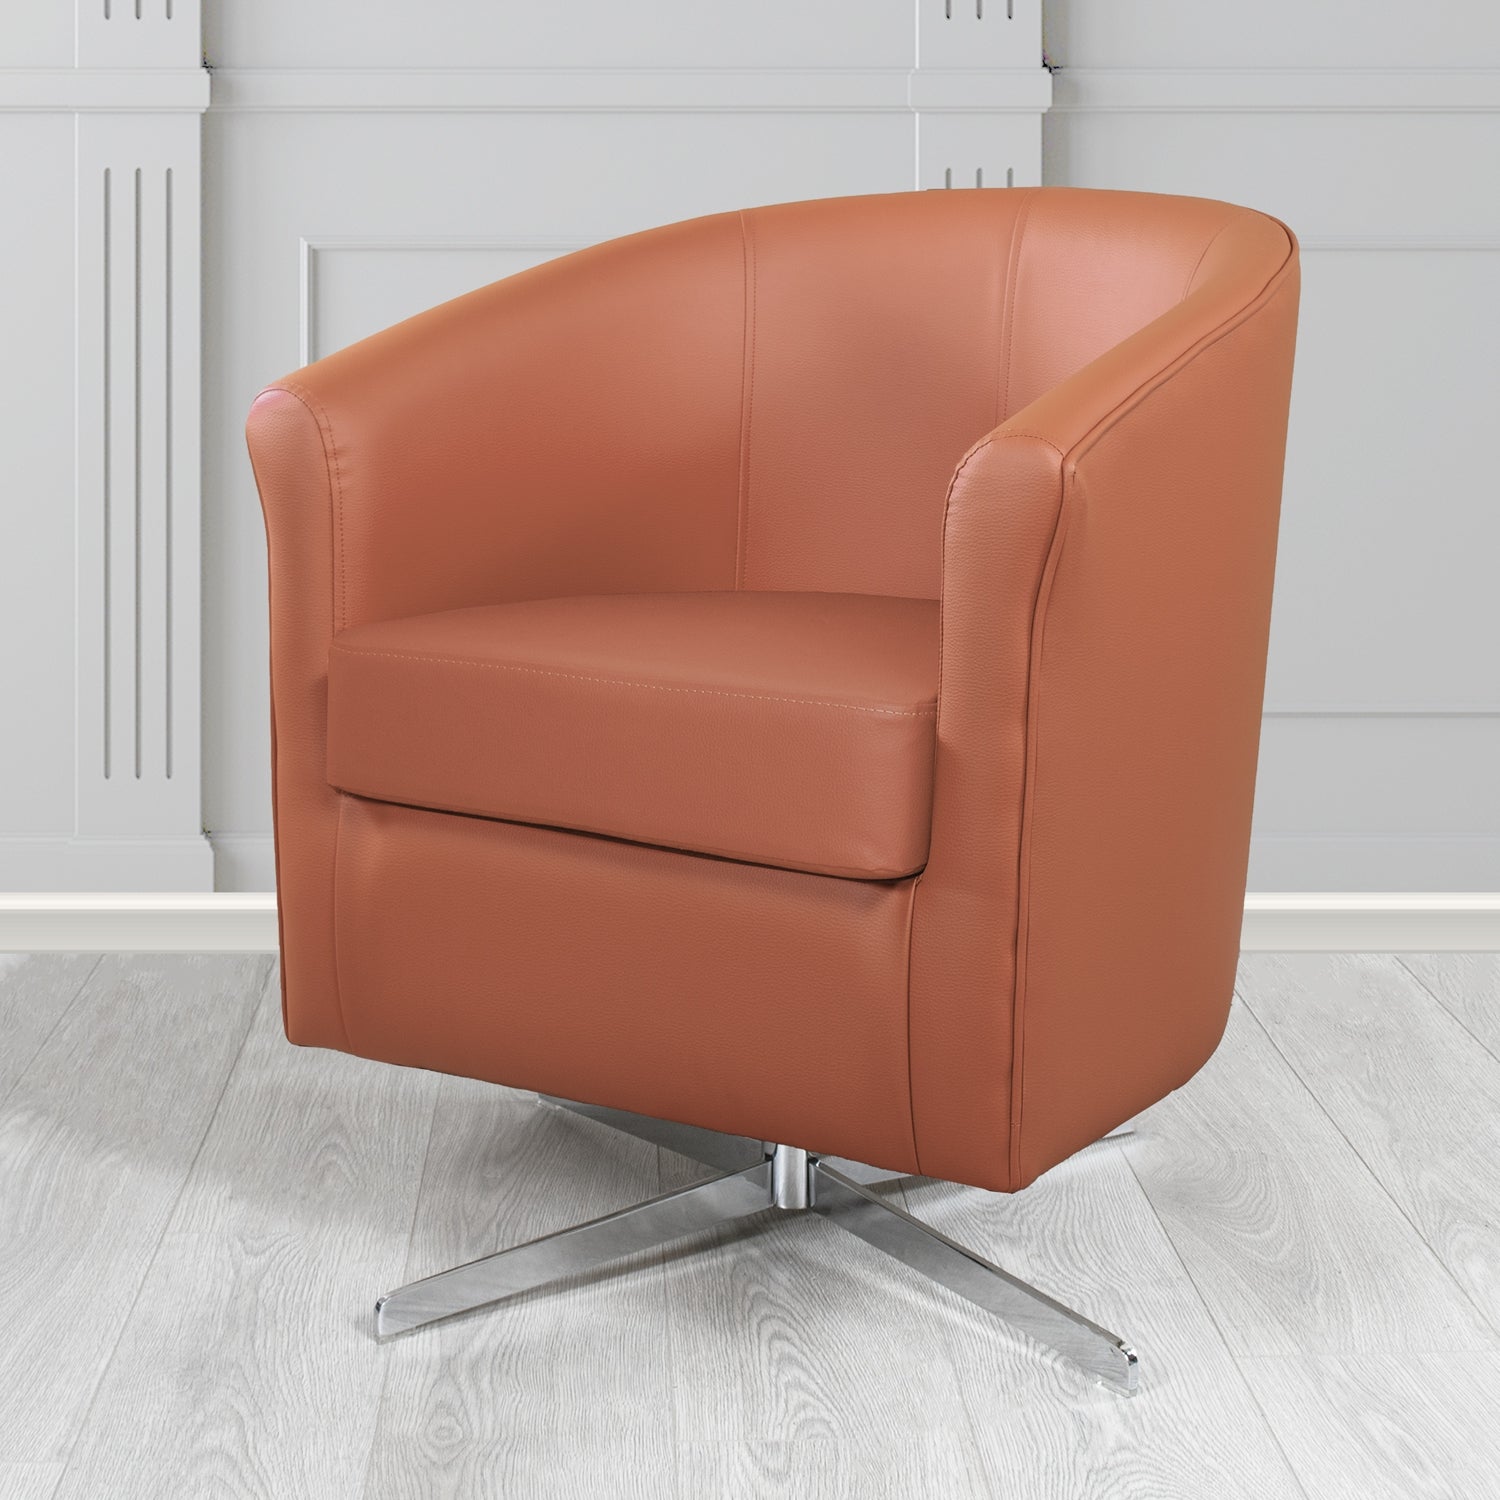 Cannes Swivel Tub Chair in Just Colour Rusty Crib 5 Faux Leather - The Tub Chair Shop